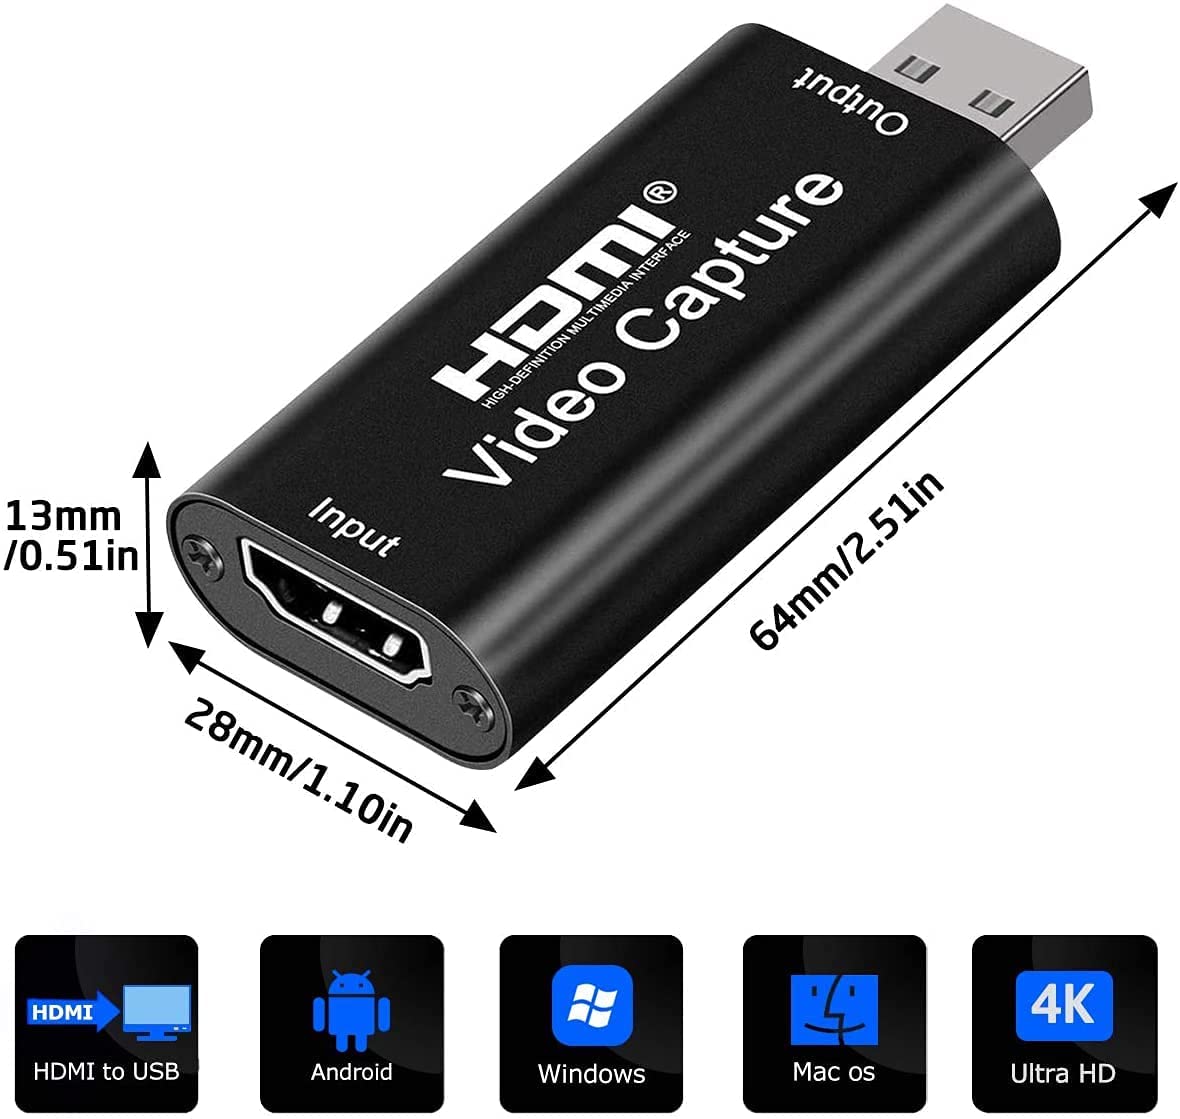 Hdmi To Usb 2.0 Capture Card, 1080p Audio Video Capture Card Hdmi To Usb  Adapter For Live Streaming Compatible With Camcorder / Dslr / Computer /  Phon